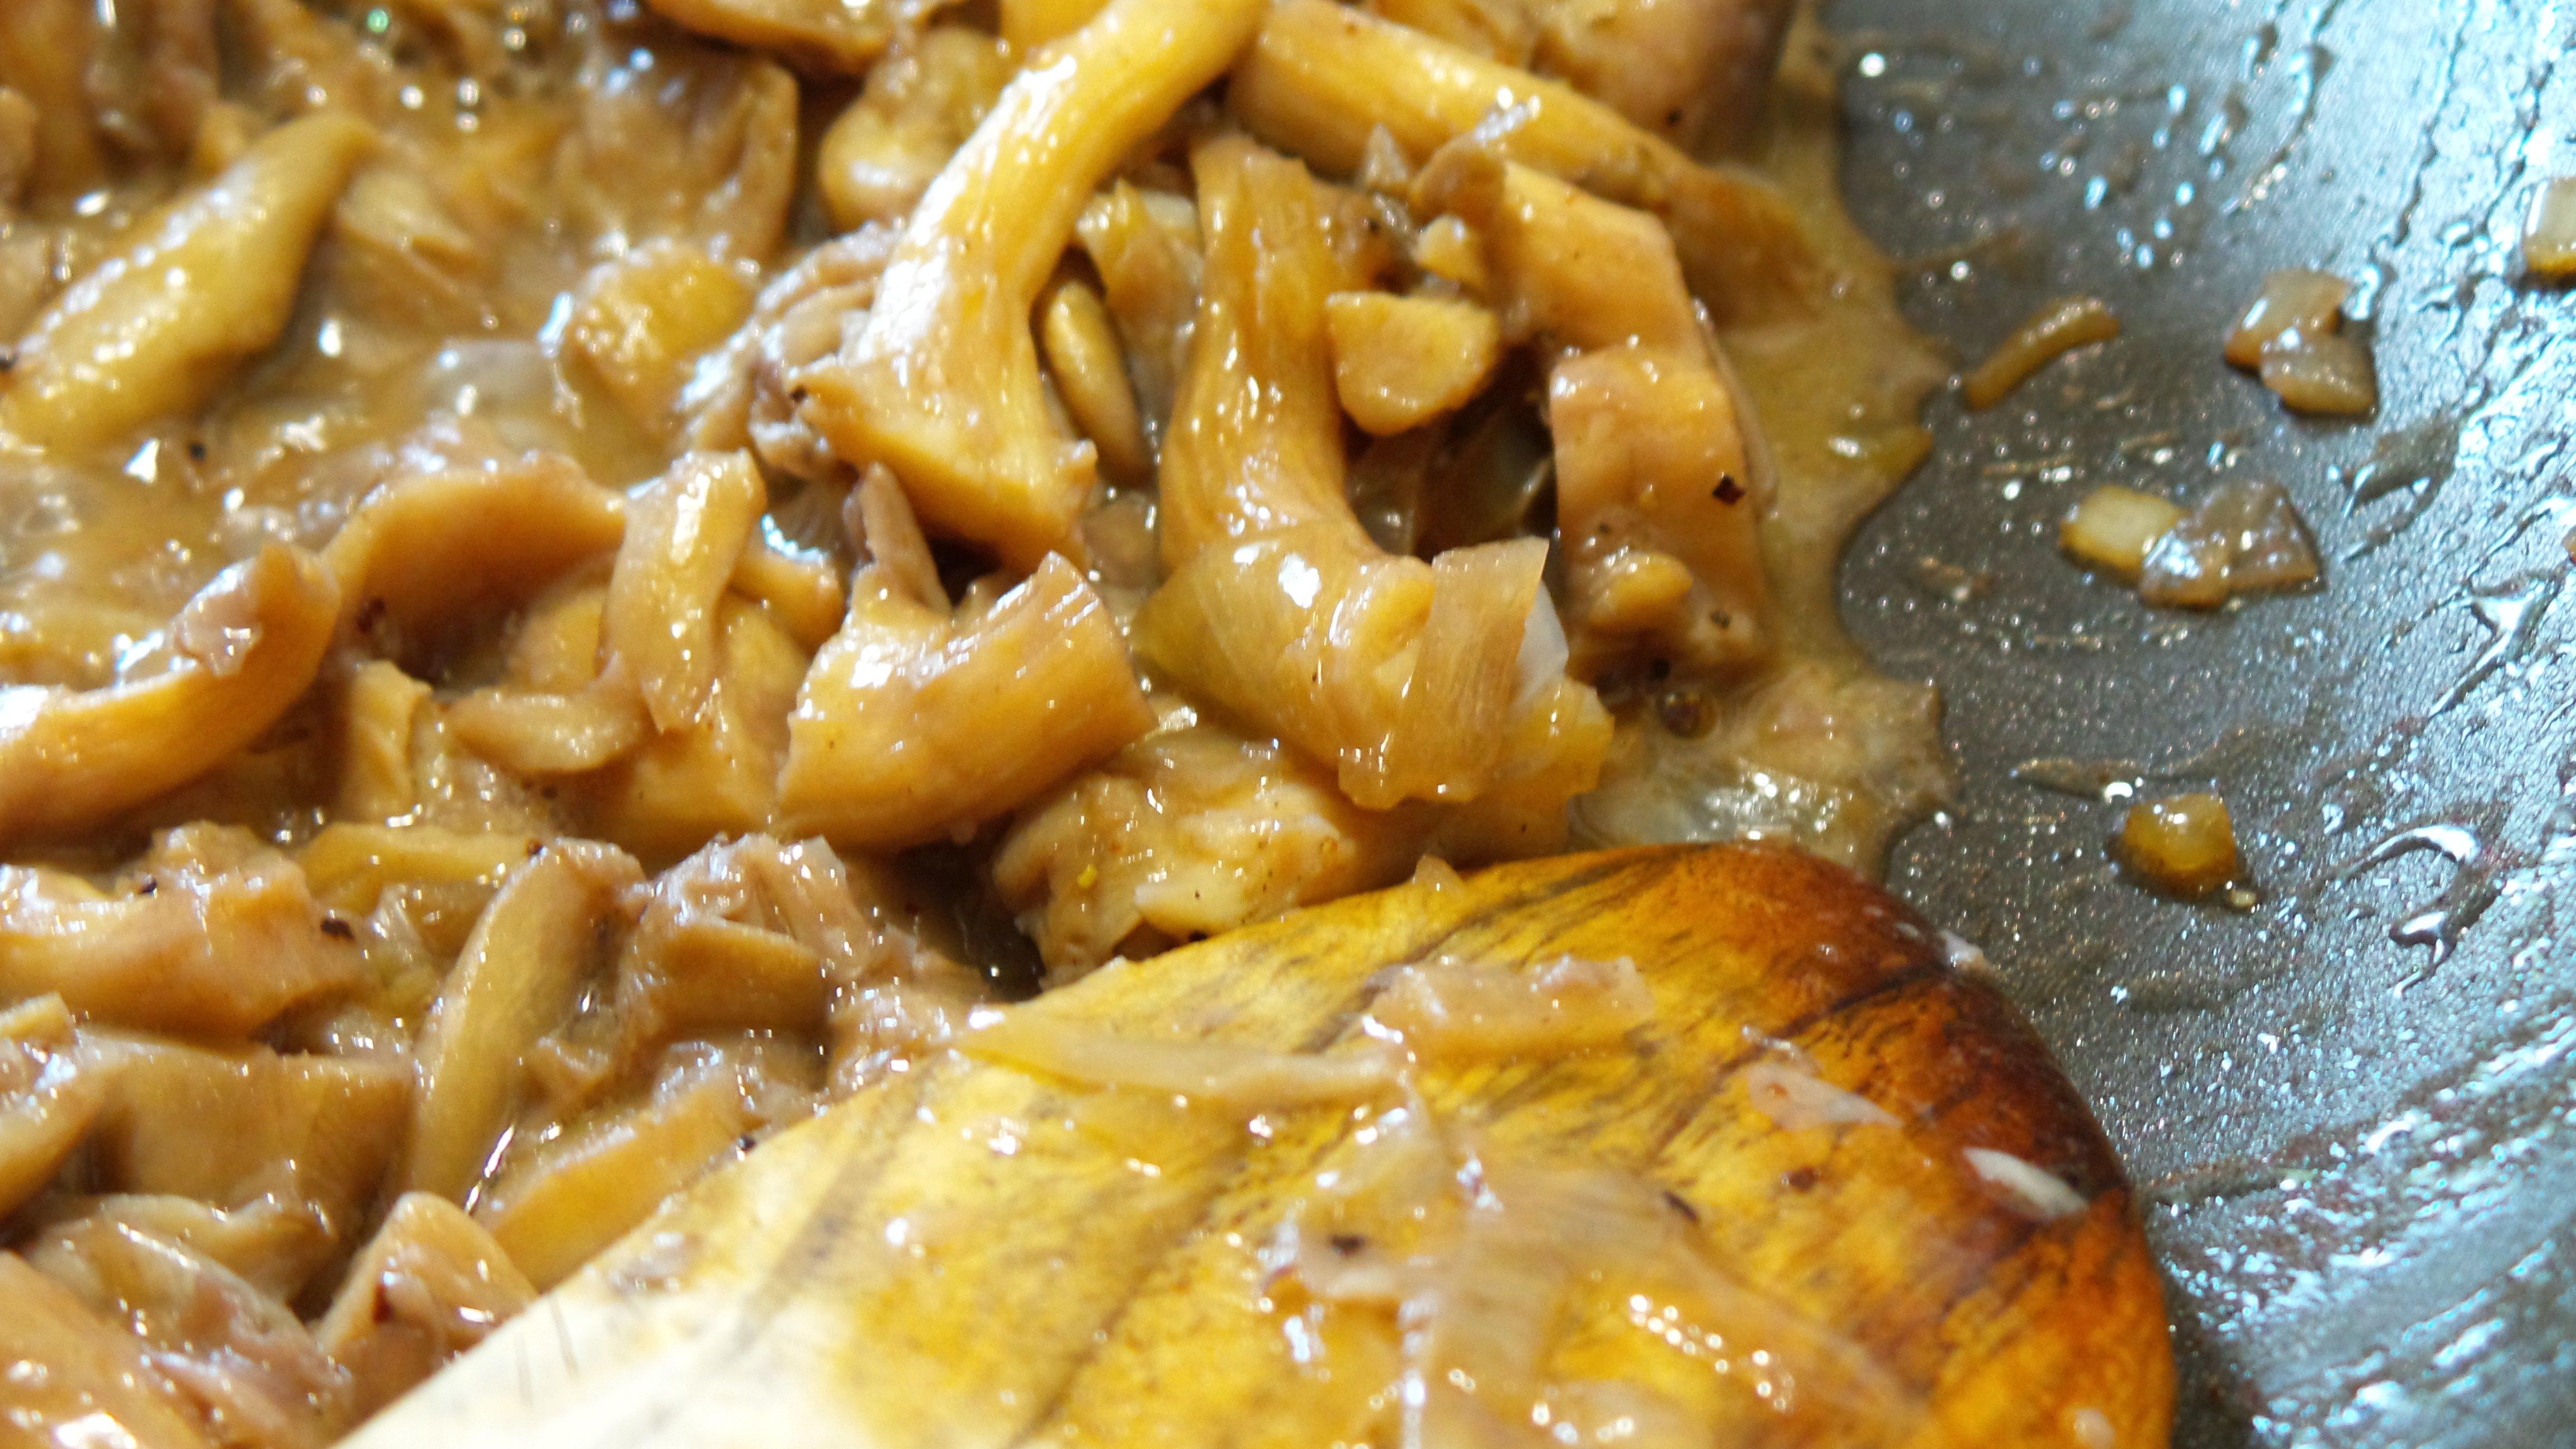 Saute the mushrooms and shallots in butter, then add the wine and reduce.